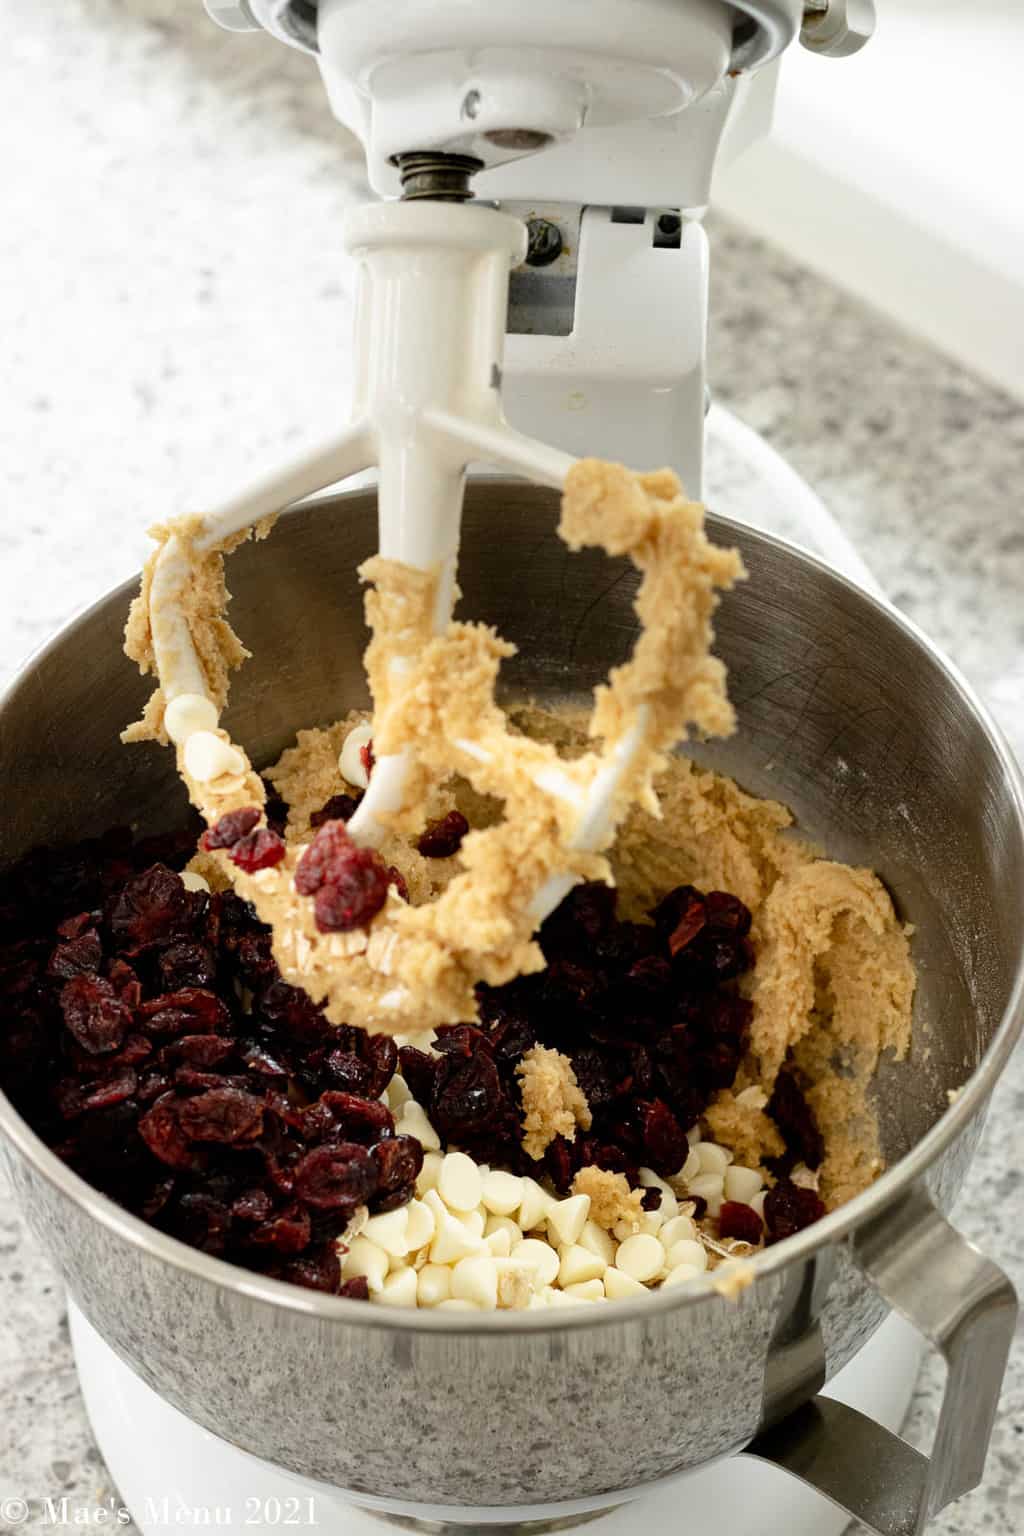 Adding the dried cranberries and white chocolate chips to the cookie batter